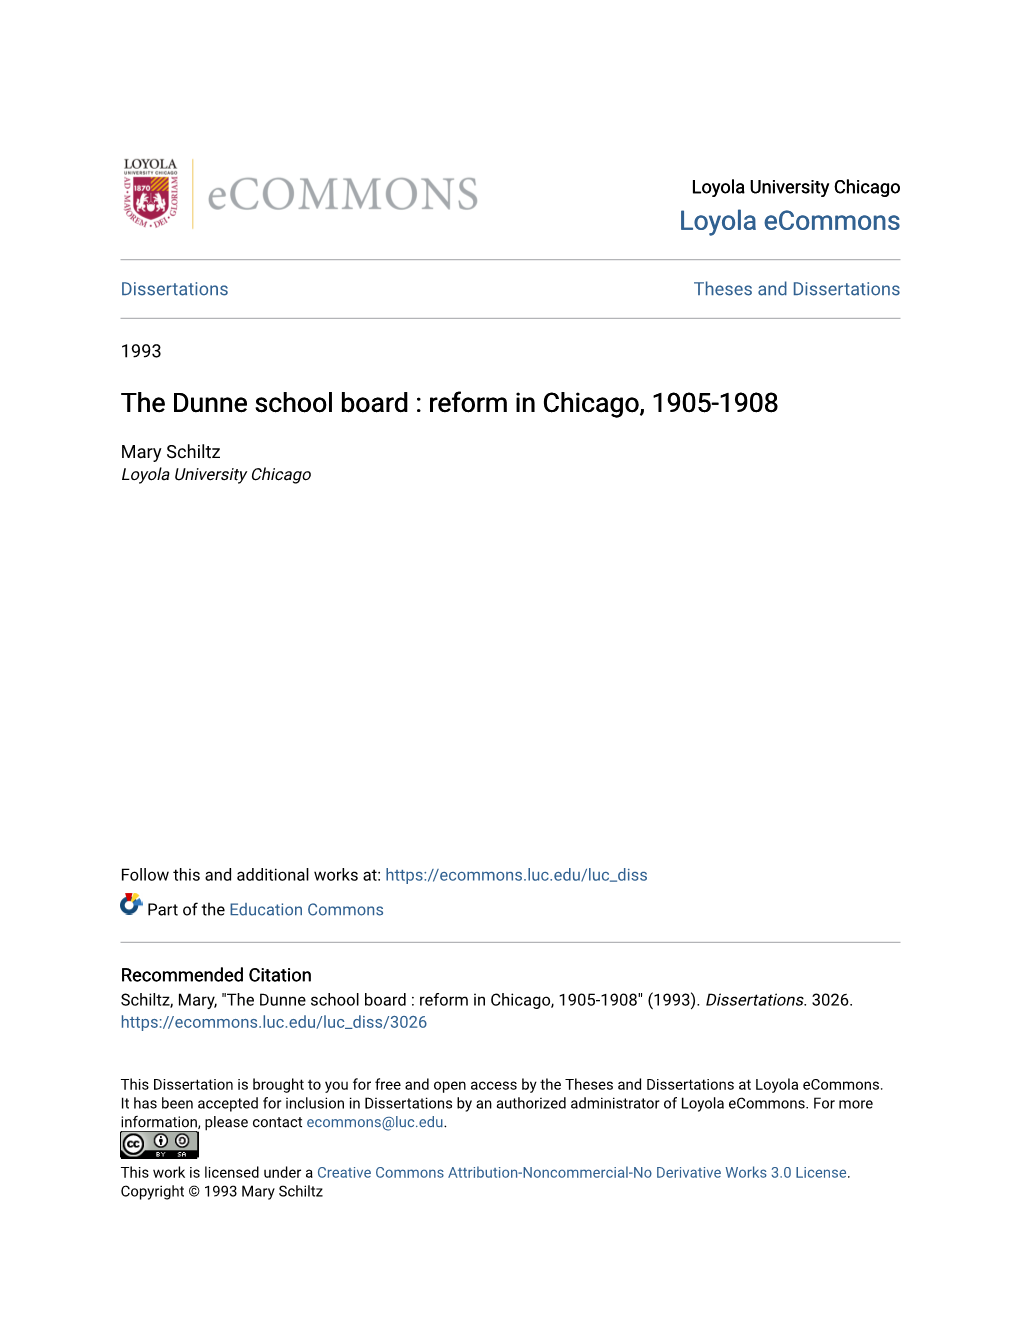 The Dunne School Board : Reform in Chicago, 1905-1908